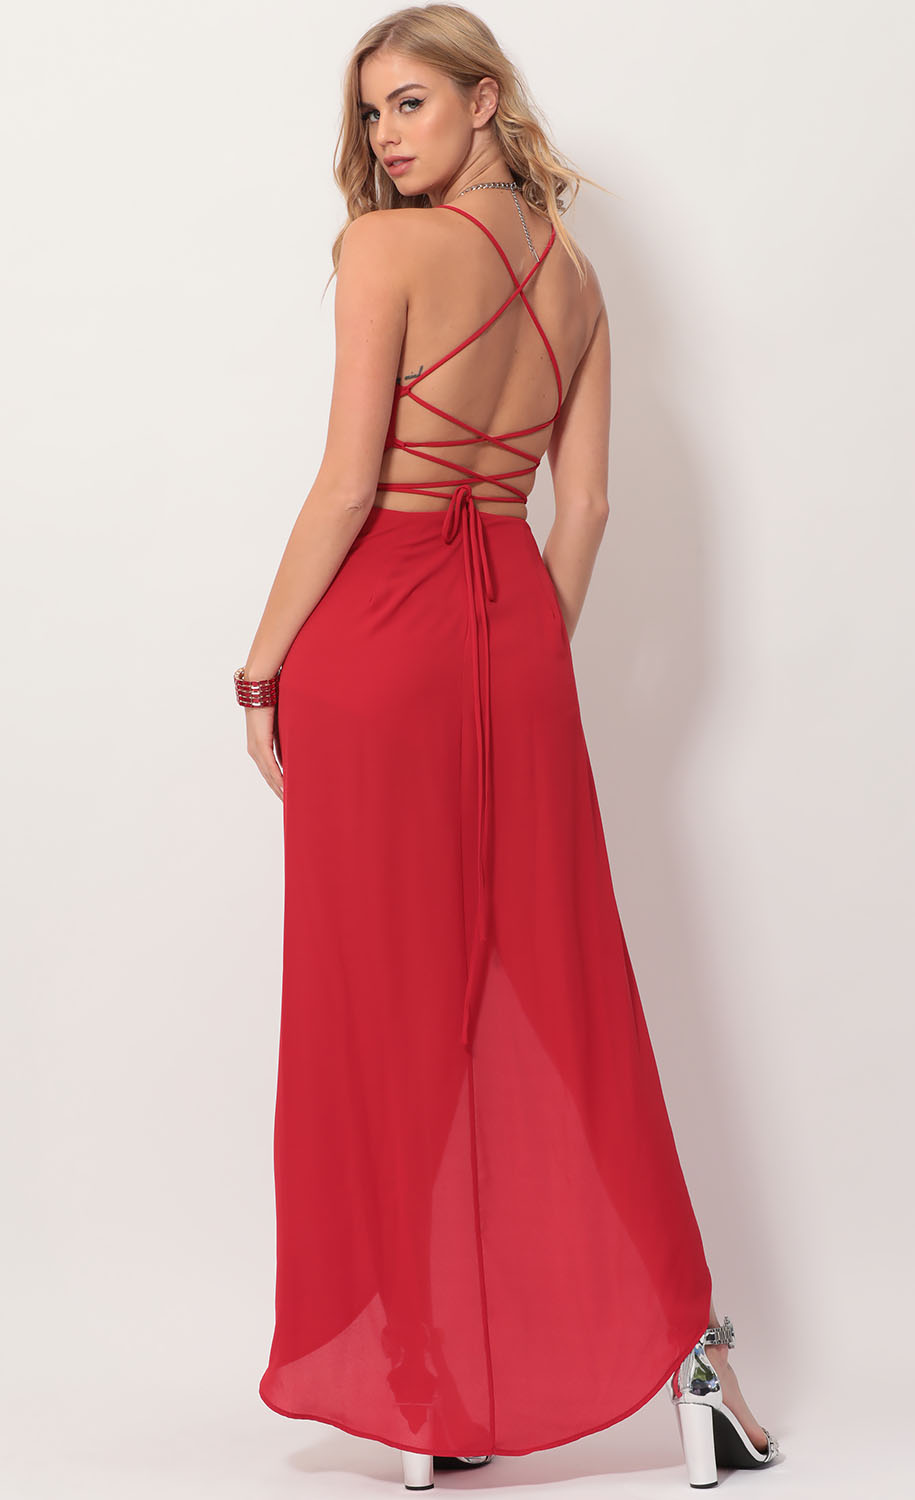 Party dresses > Chiffon Luxe Maxi Dress in Red